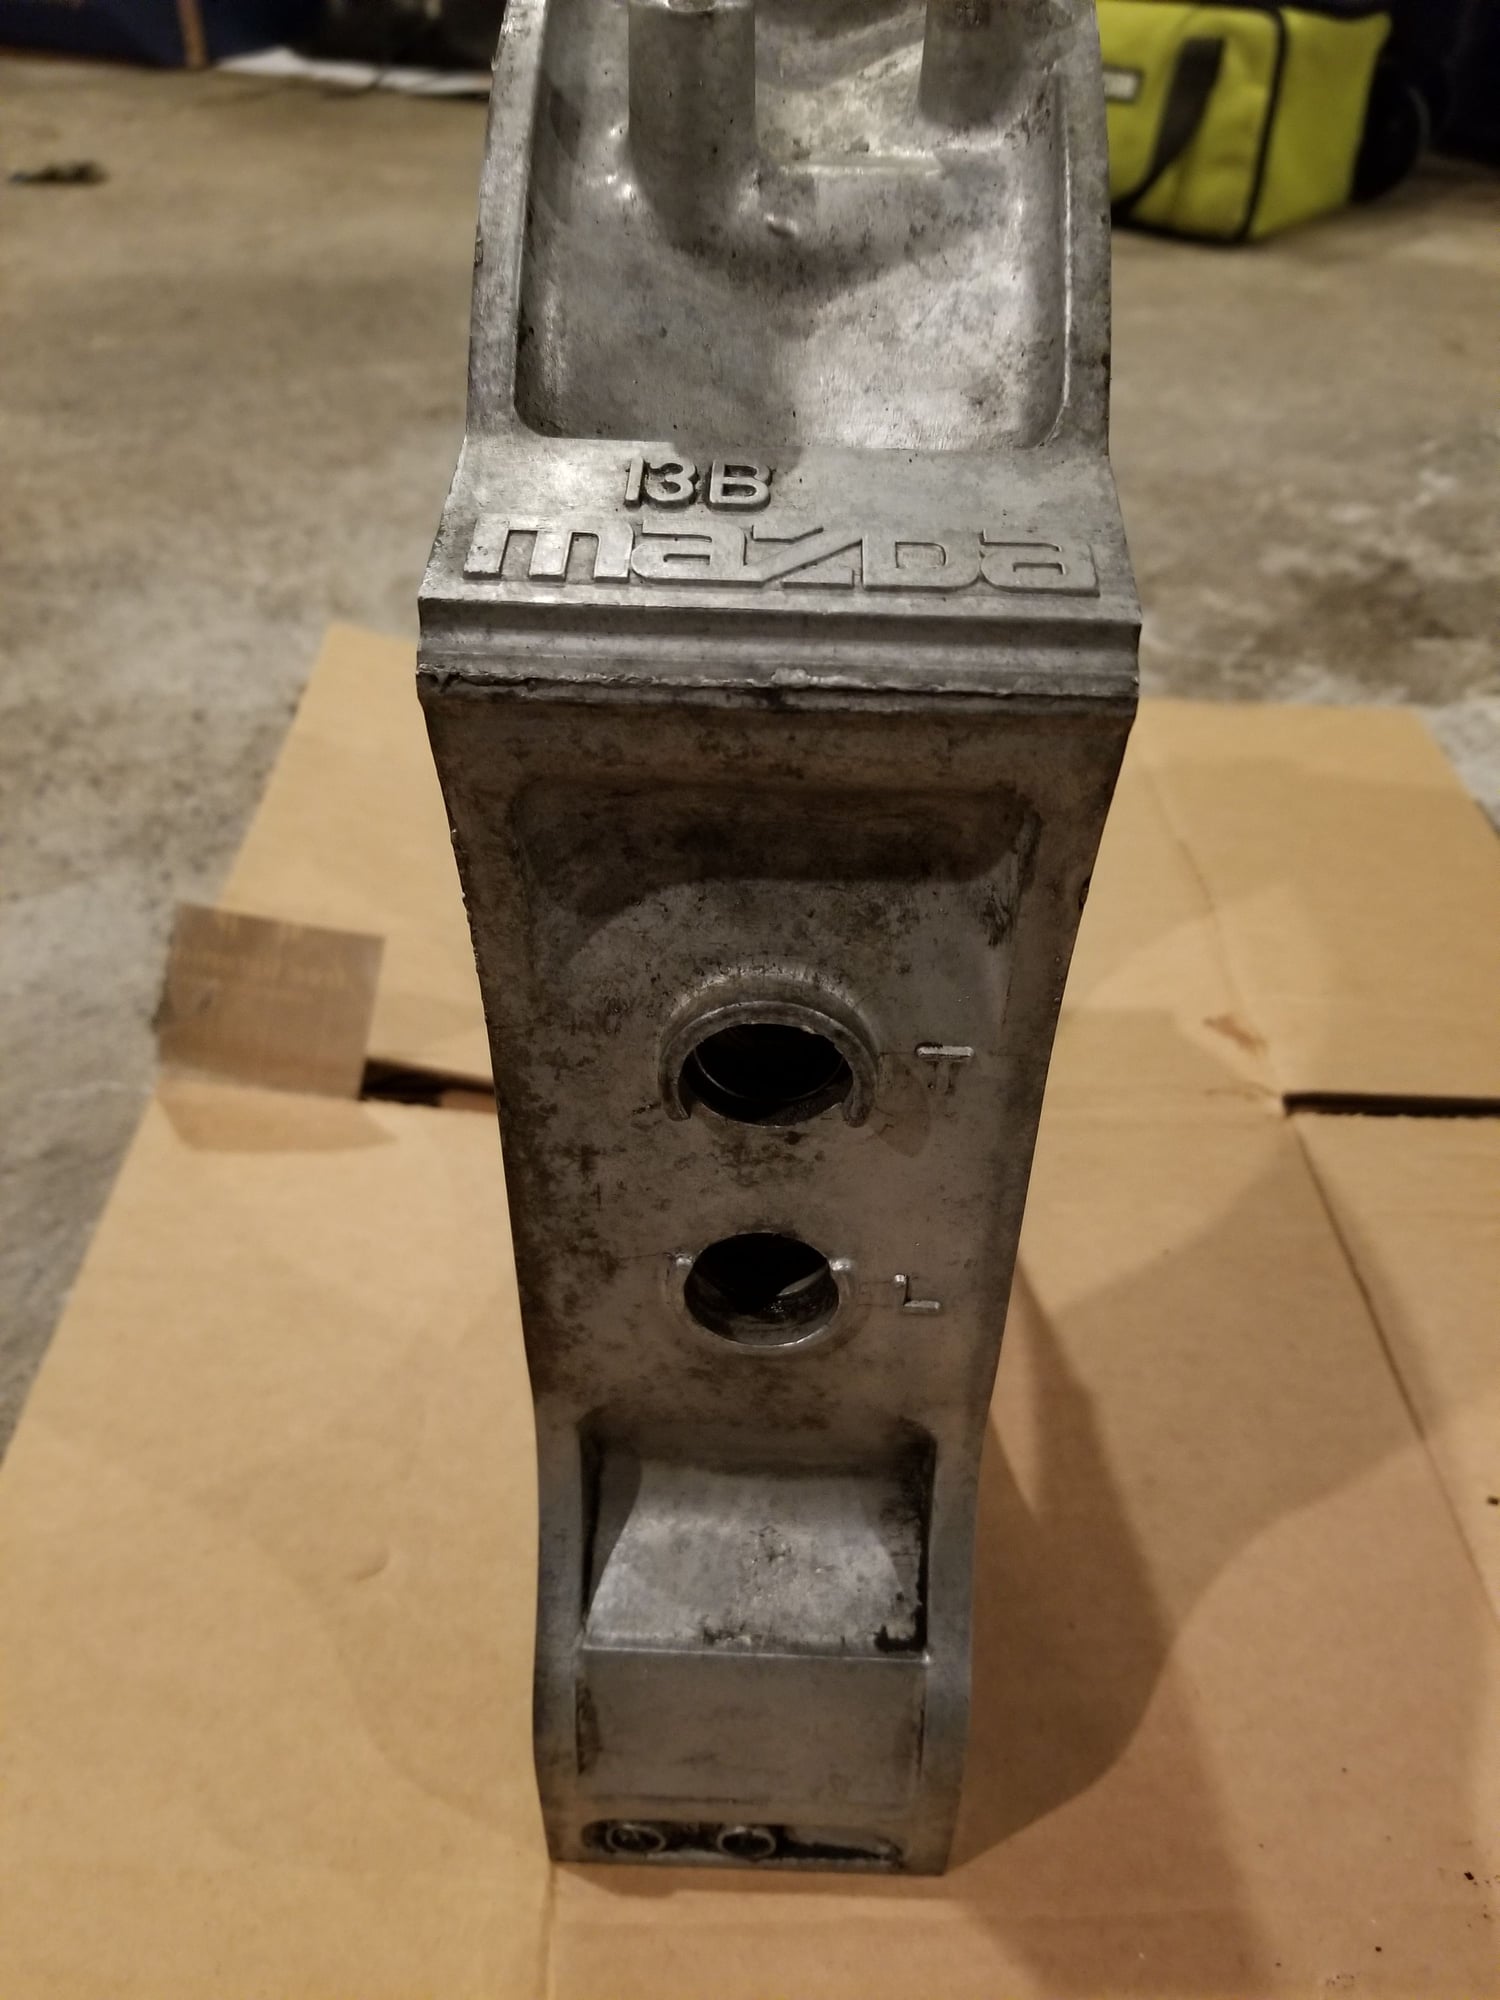 1988 Mazda RX-7 - 1988 FC/S4 NA engine parts and transmission part out - Accessories - $1 - Coopersburg, PA 18036, United States